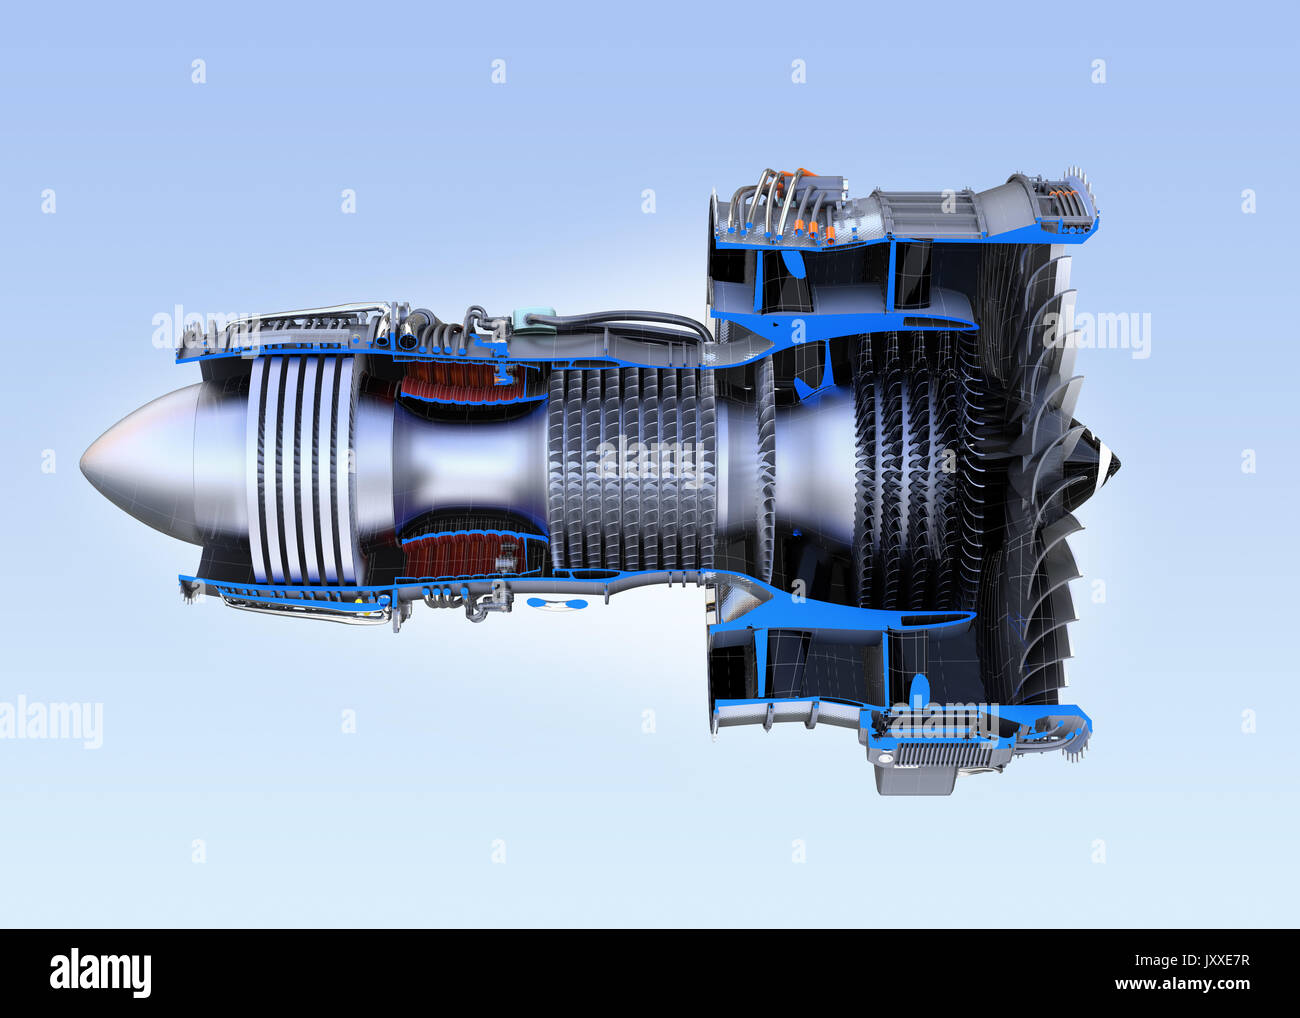 Turbofan jet engine's cross section frame isolated on blue background. 3D rendering image. Stock Photo